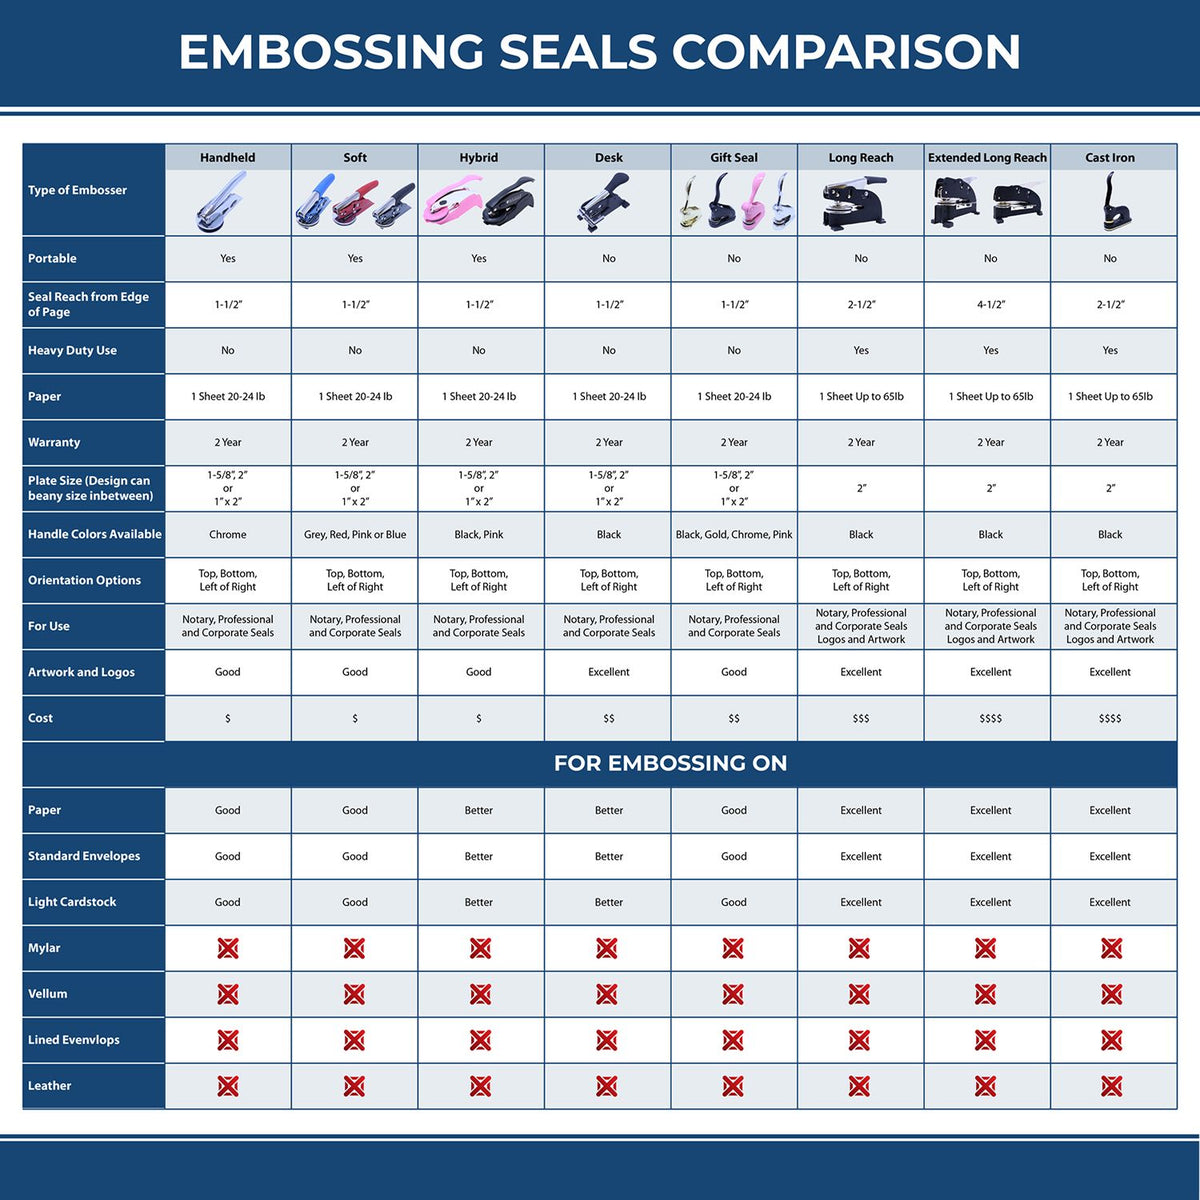 A comparison chart for the different types of mount models available for the Heavy Duty Cast Iron Delaware Geologist Seal Embosser